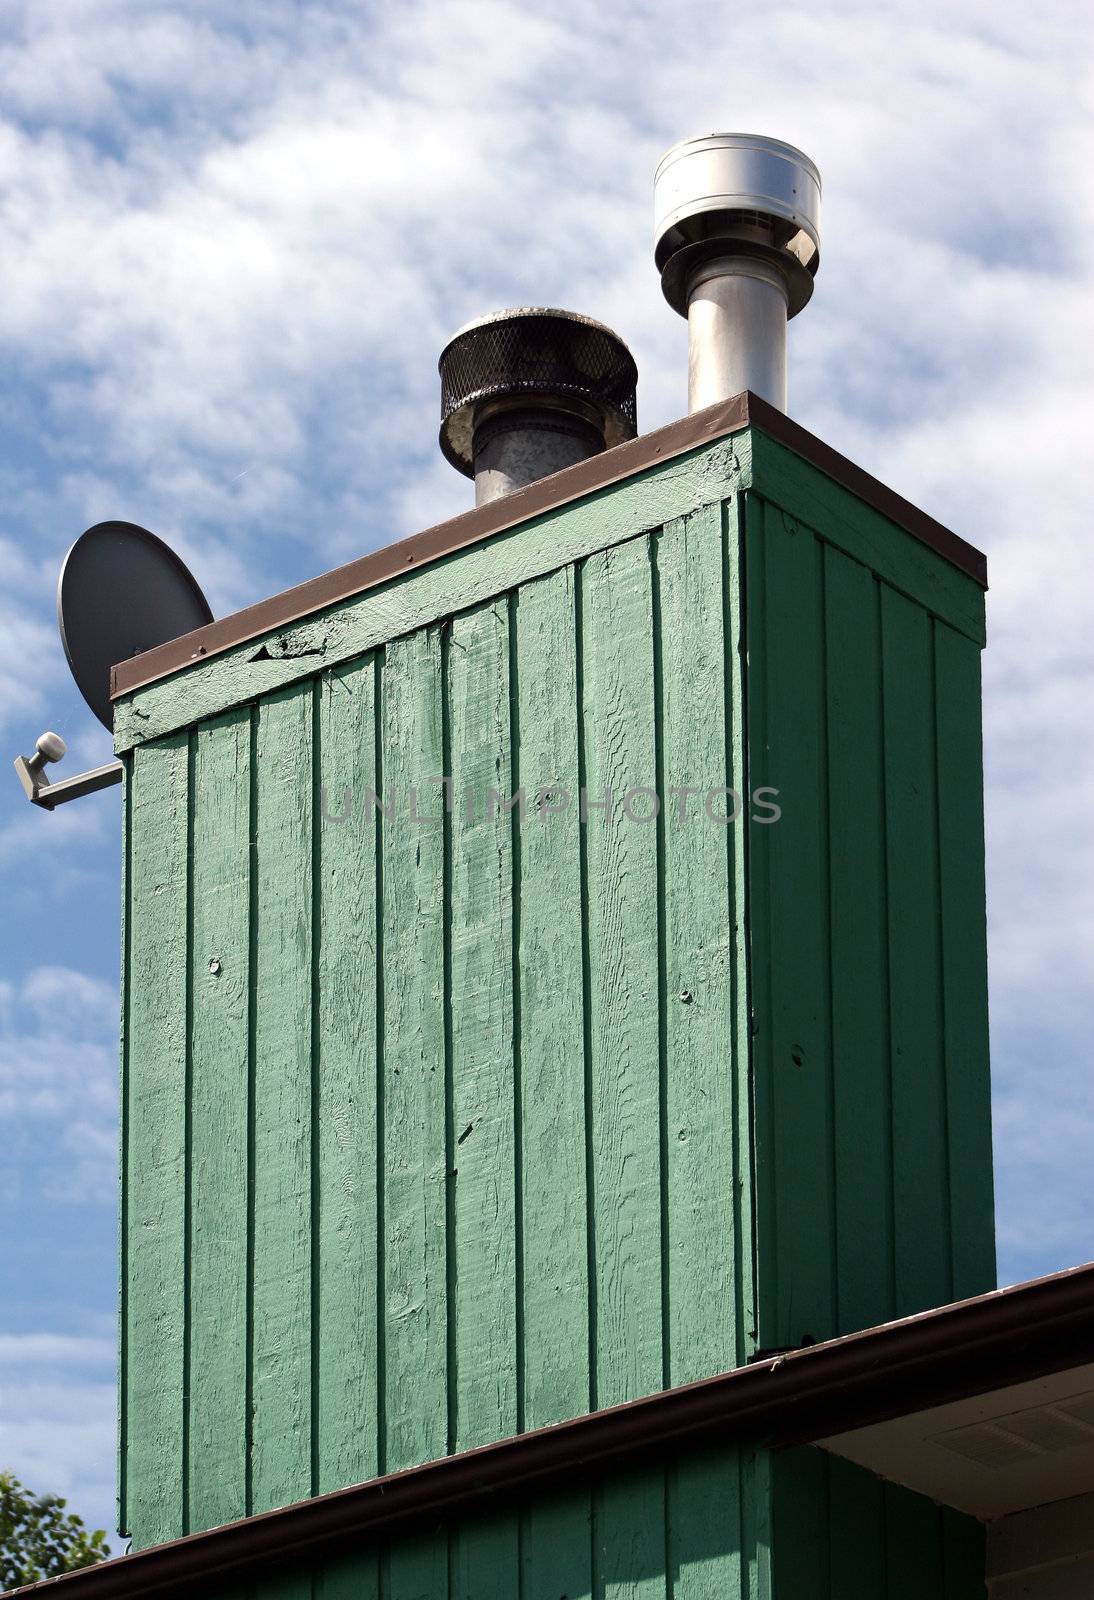 A green wooden chimney on a home with sky in the background